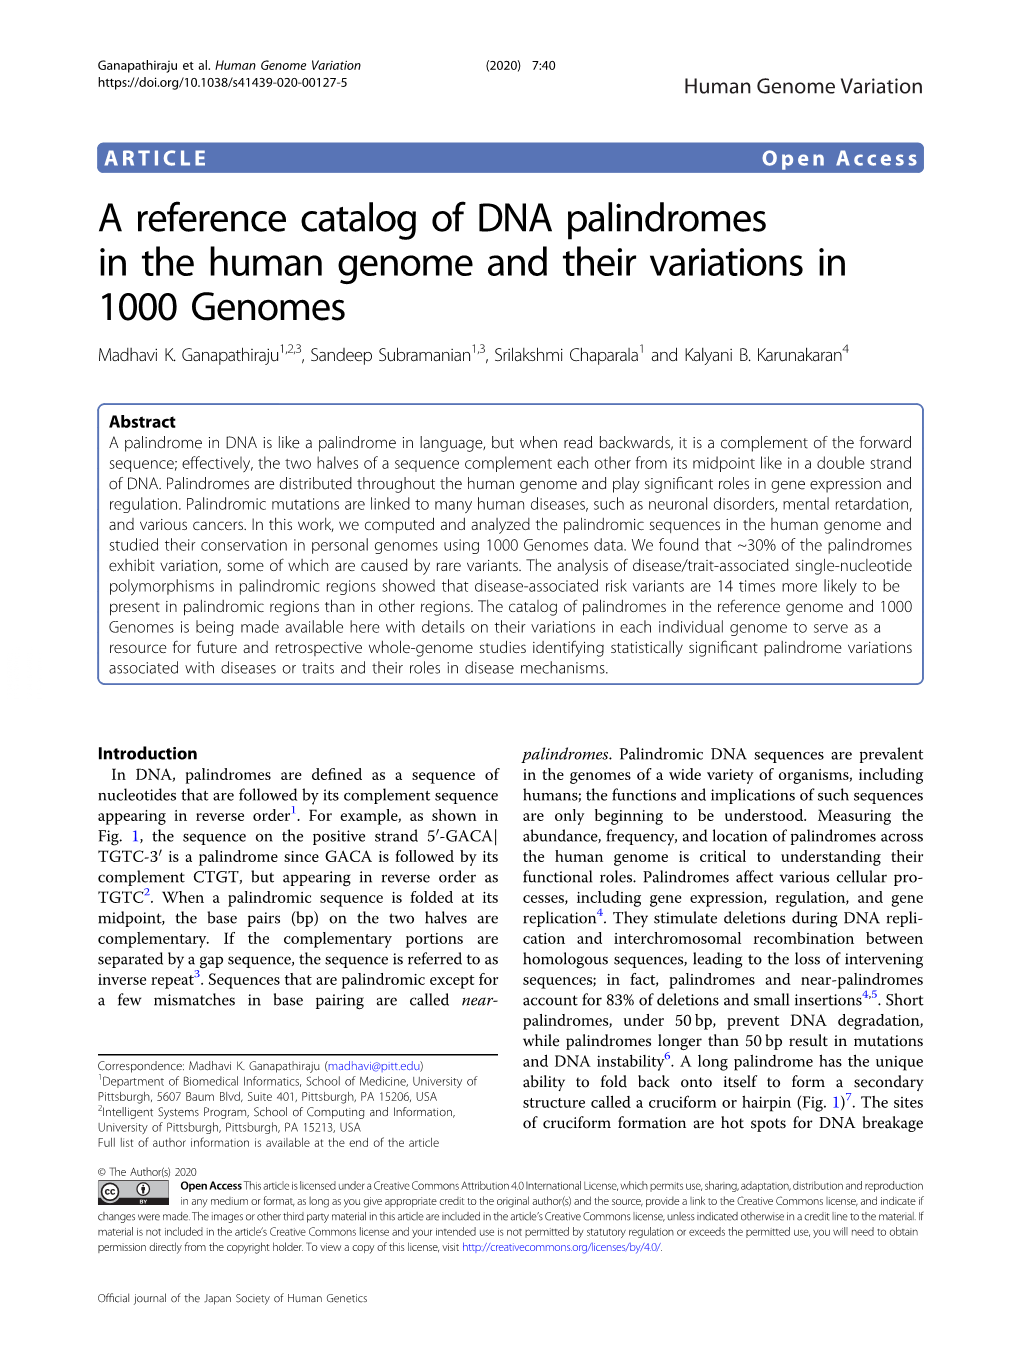 A Reference Catalog of DNA Palindromes in the Human Genome and Their Variations in 1000 Genomes Madhavi K